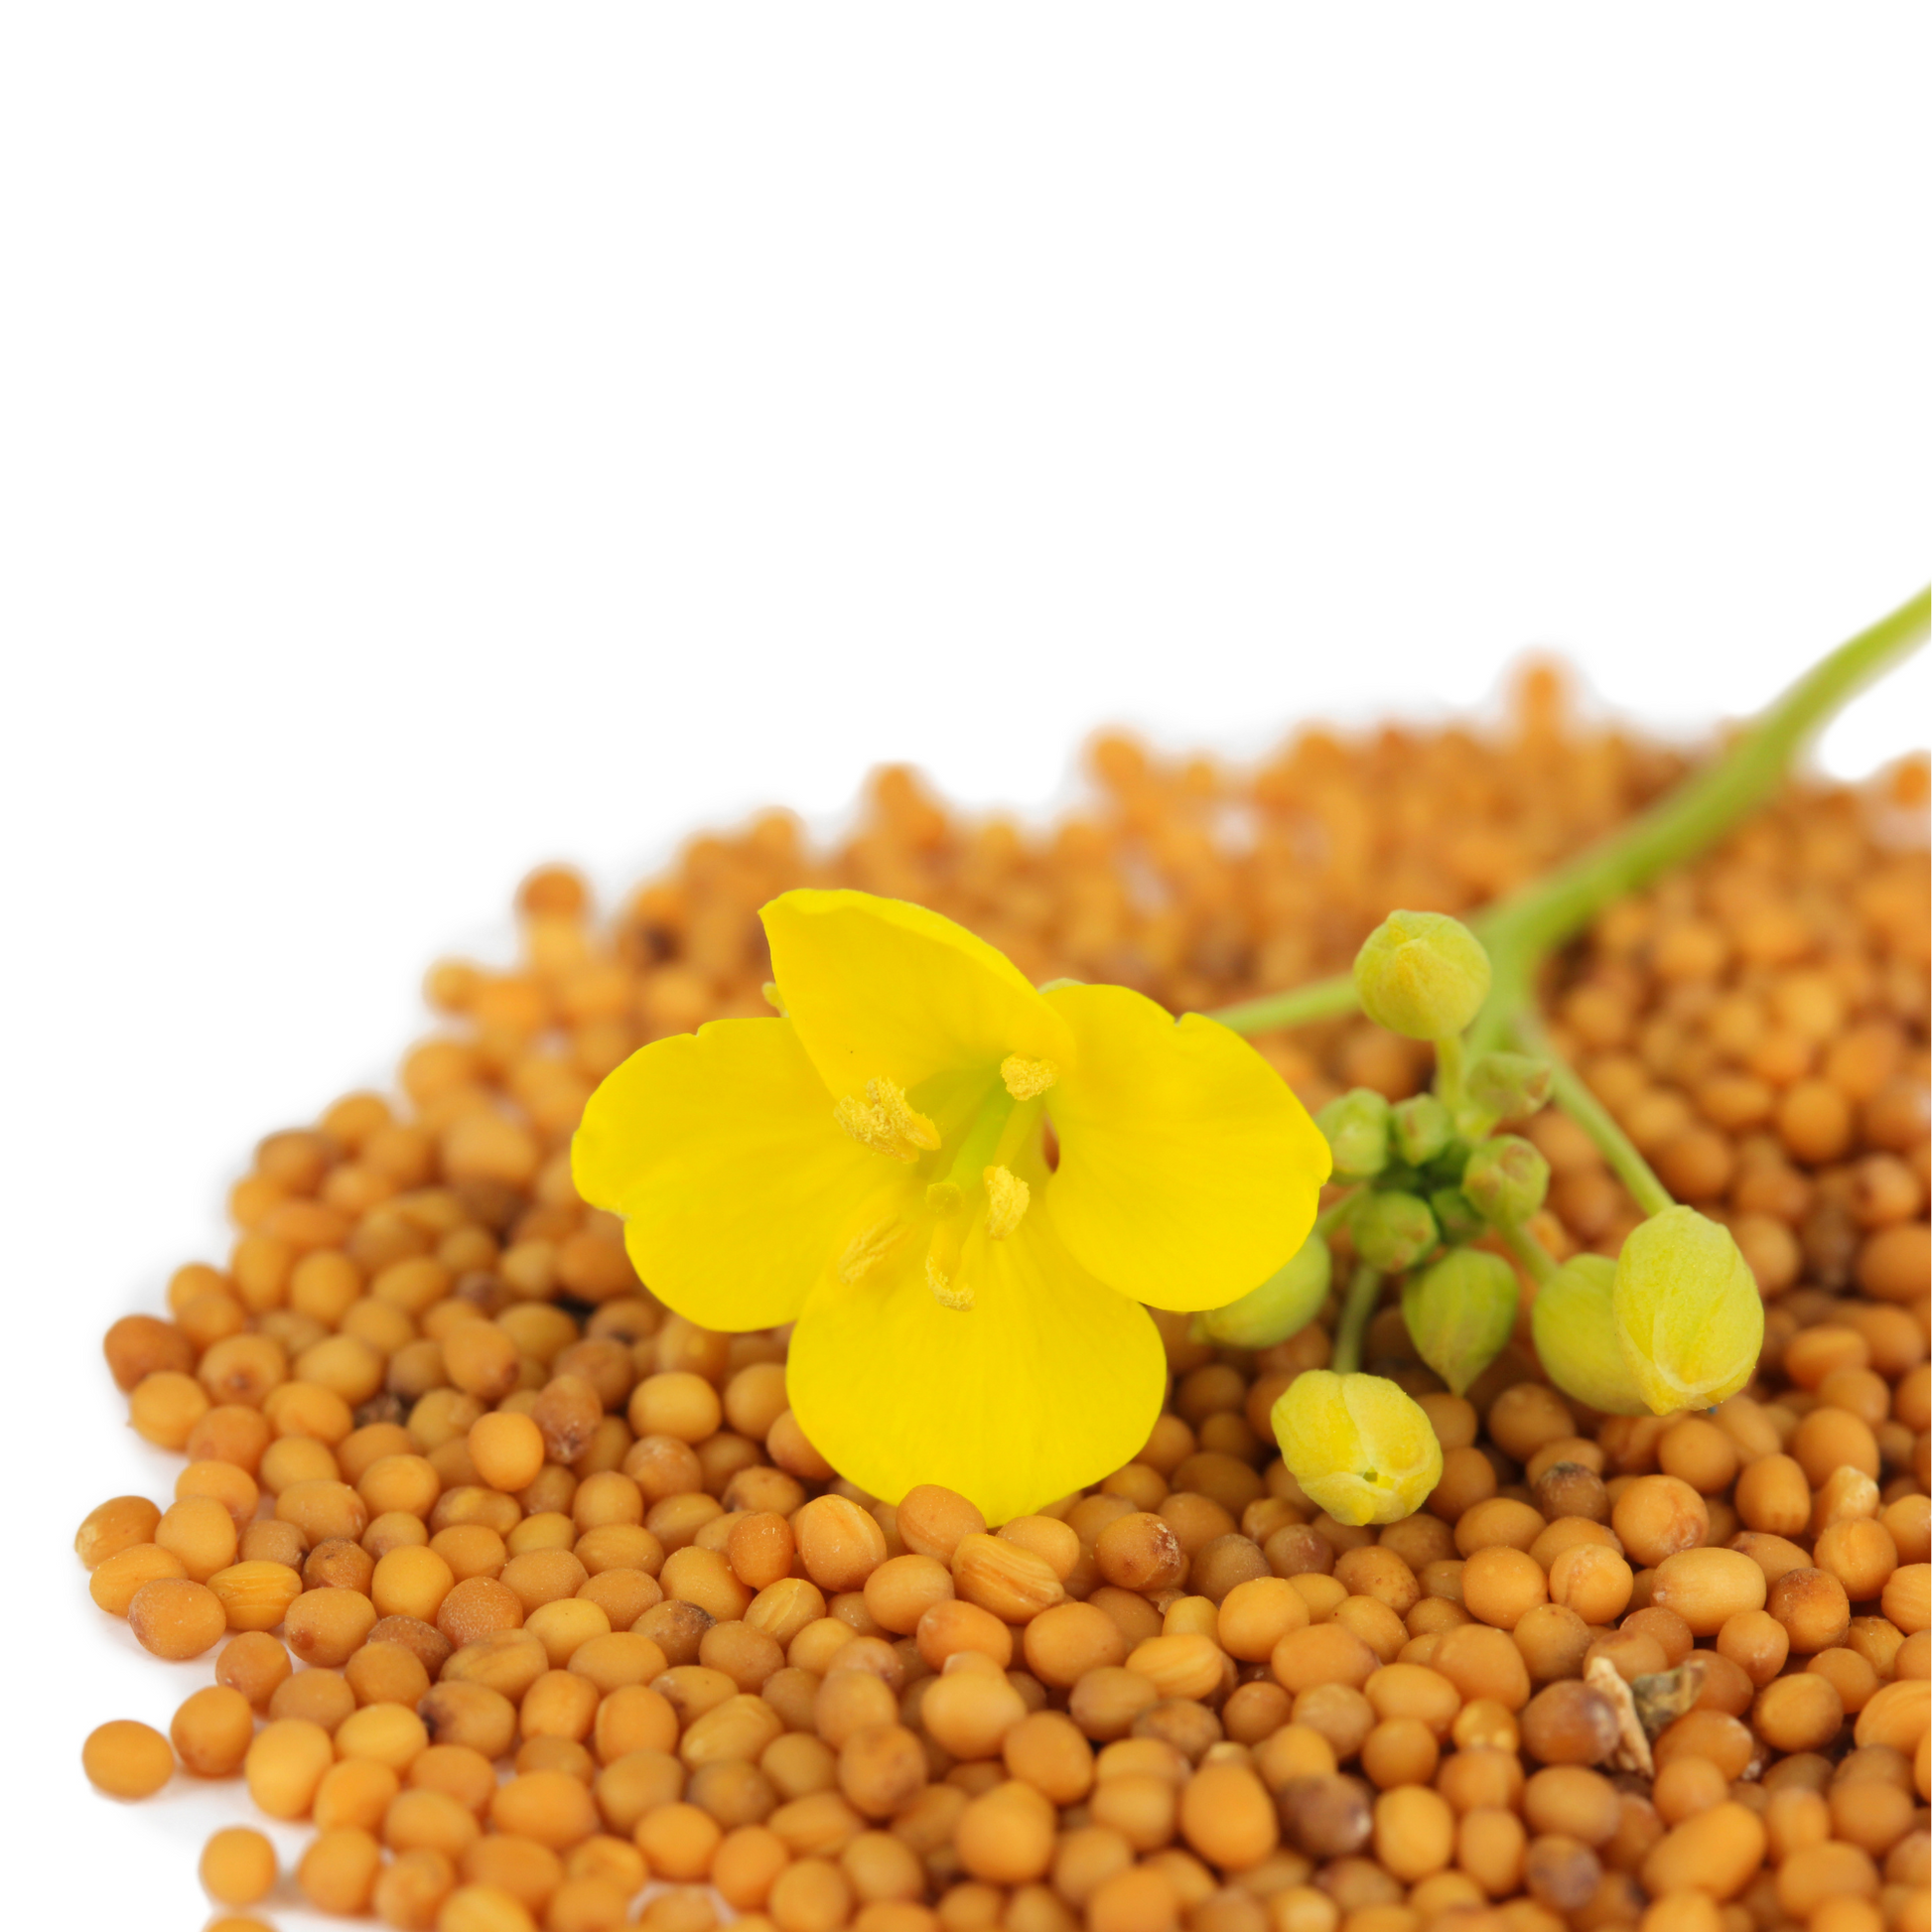 Display of Southern Giant Mustard Seed and flower example on a white backdrop